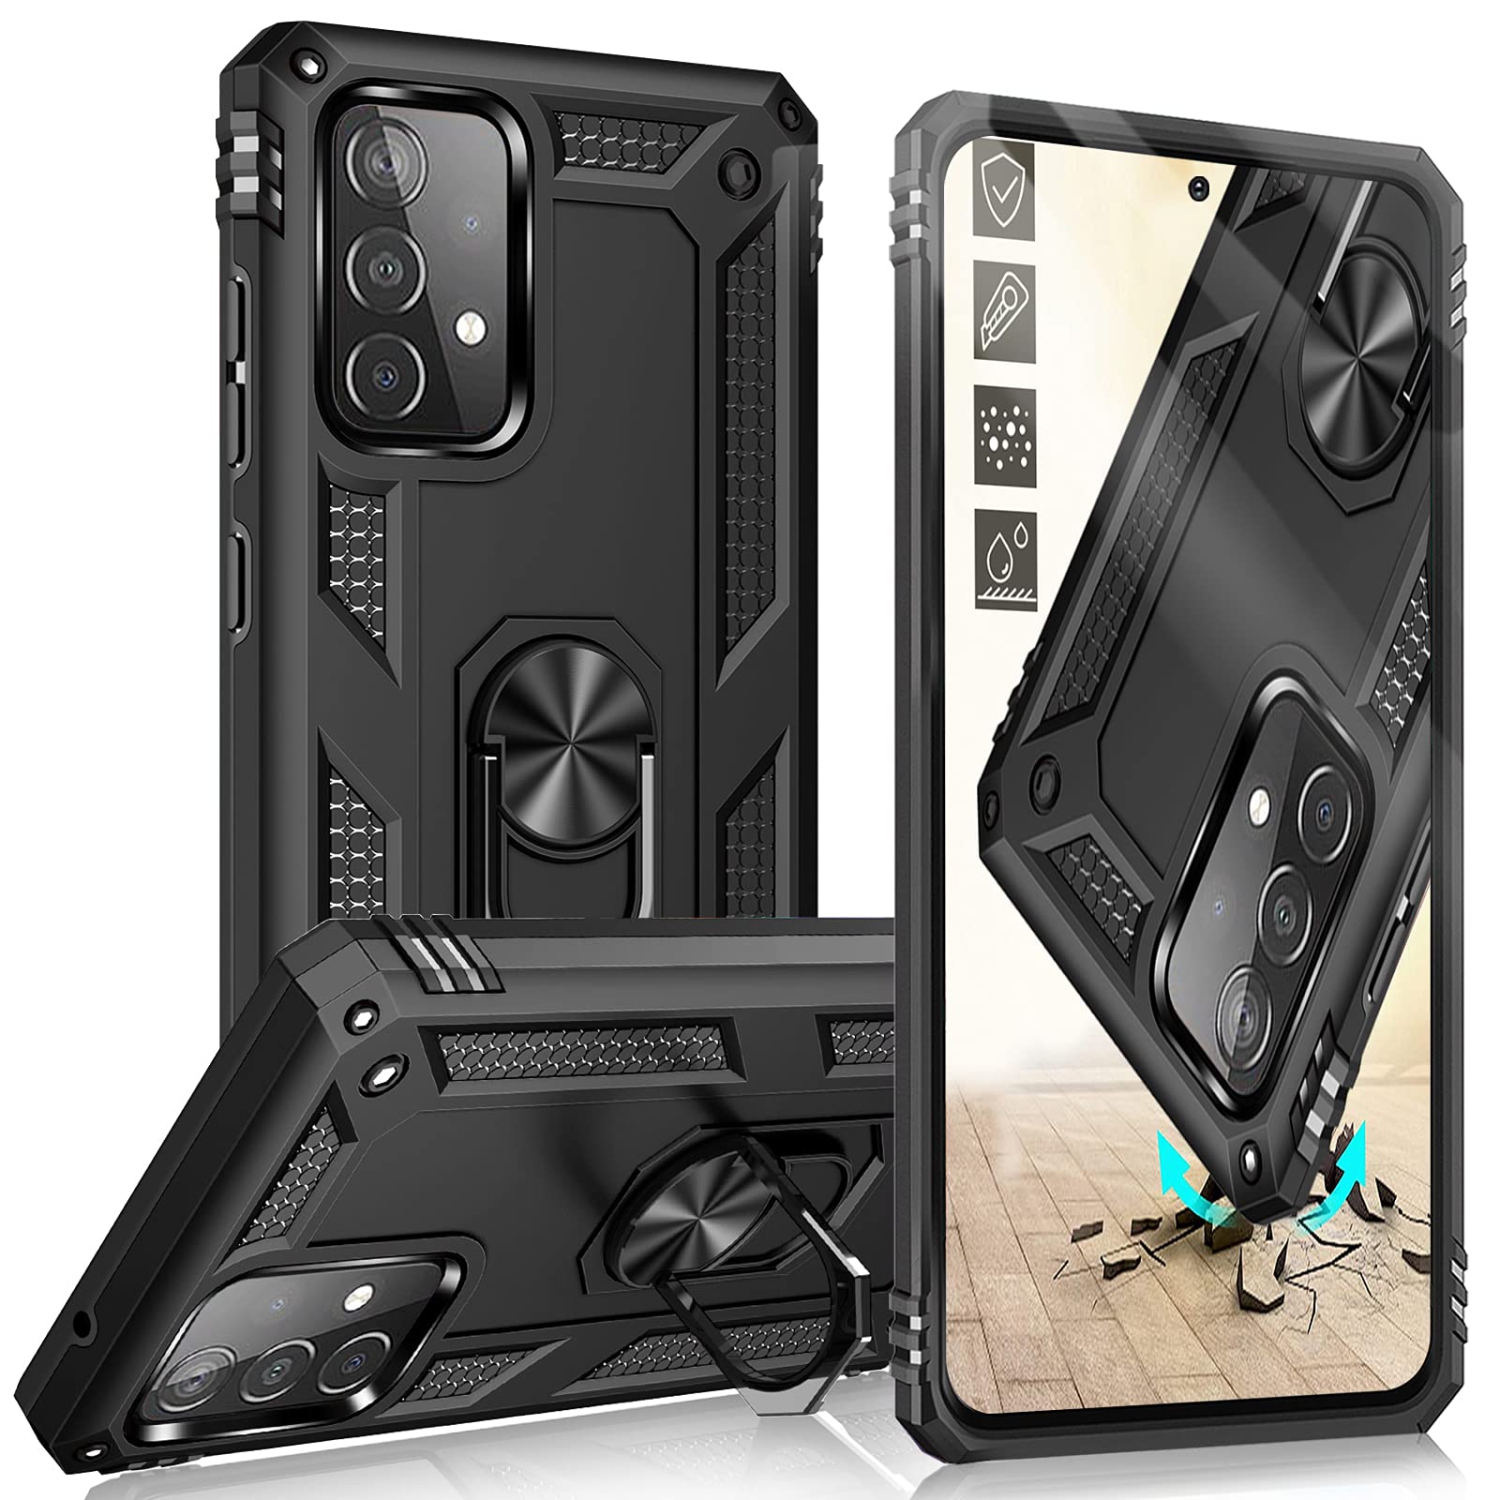 Galaxy A52 Case for Samsung A52 Basic Cases Rugged Military Grade Heavy Duty Armor Shockproof Anti-Drop A52 4G/5G Phone Case